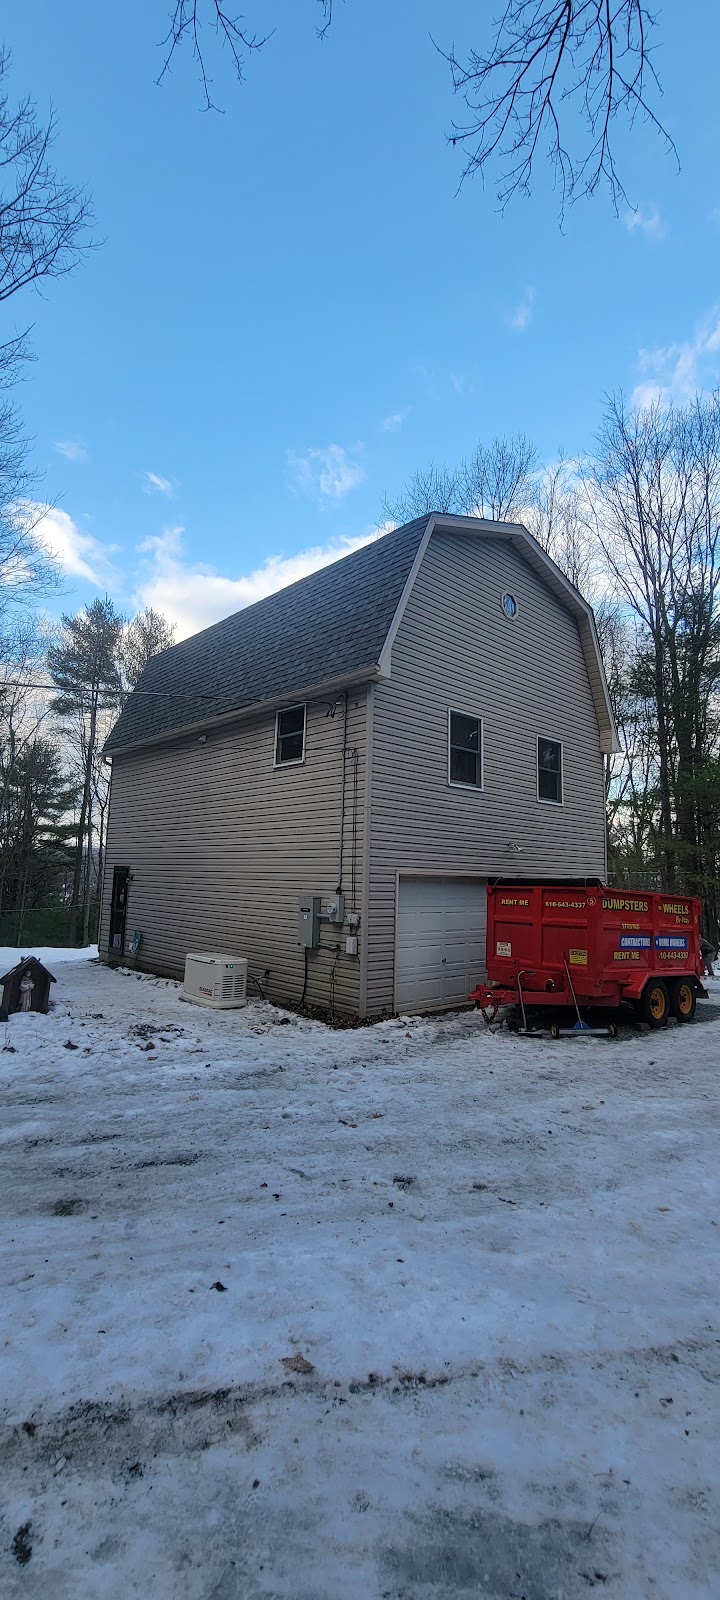 J&J Roofing and General Contracting | Little Gap Rd, Palmerton, PA 18071 | Phone: (570) 401-1348